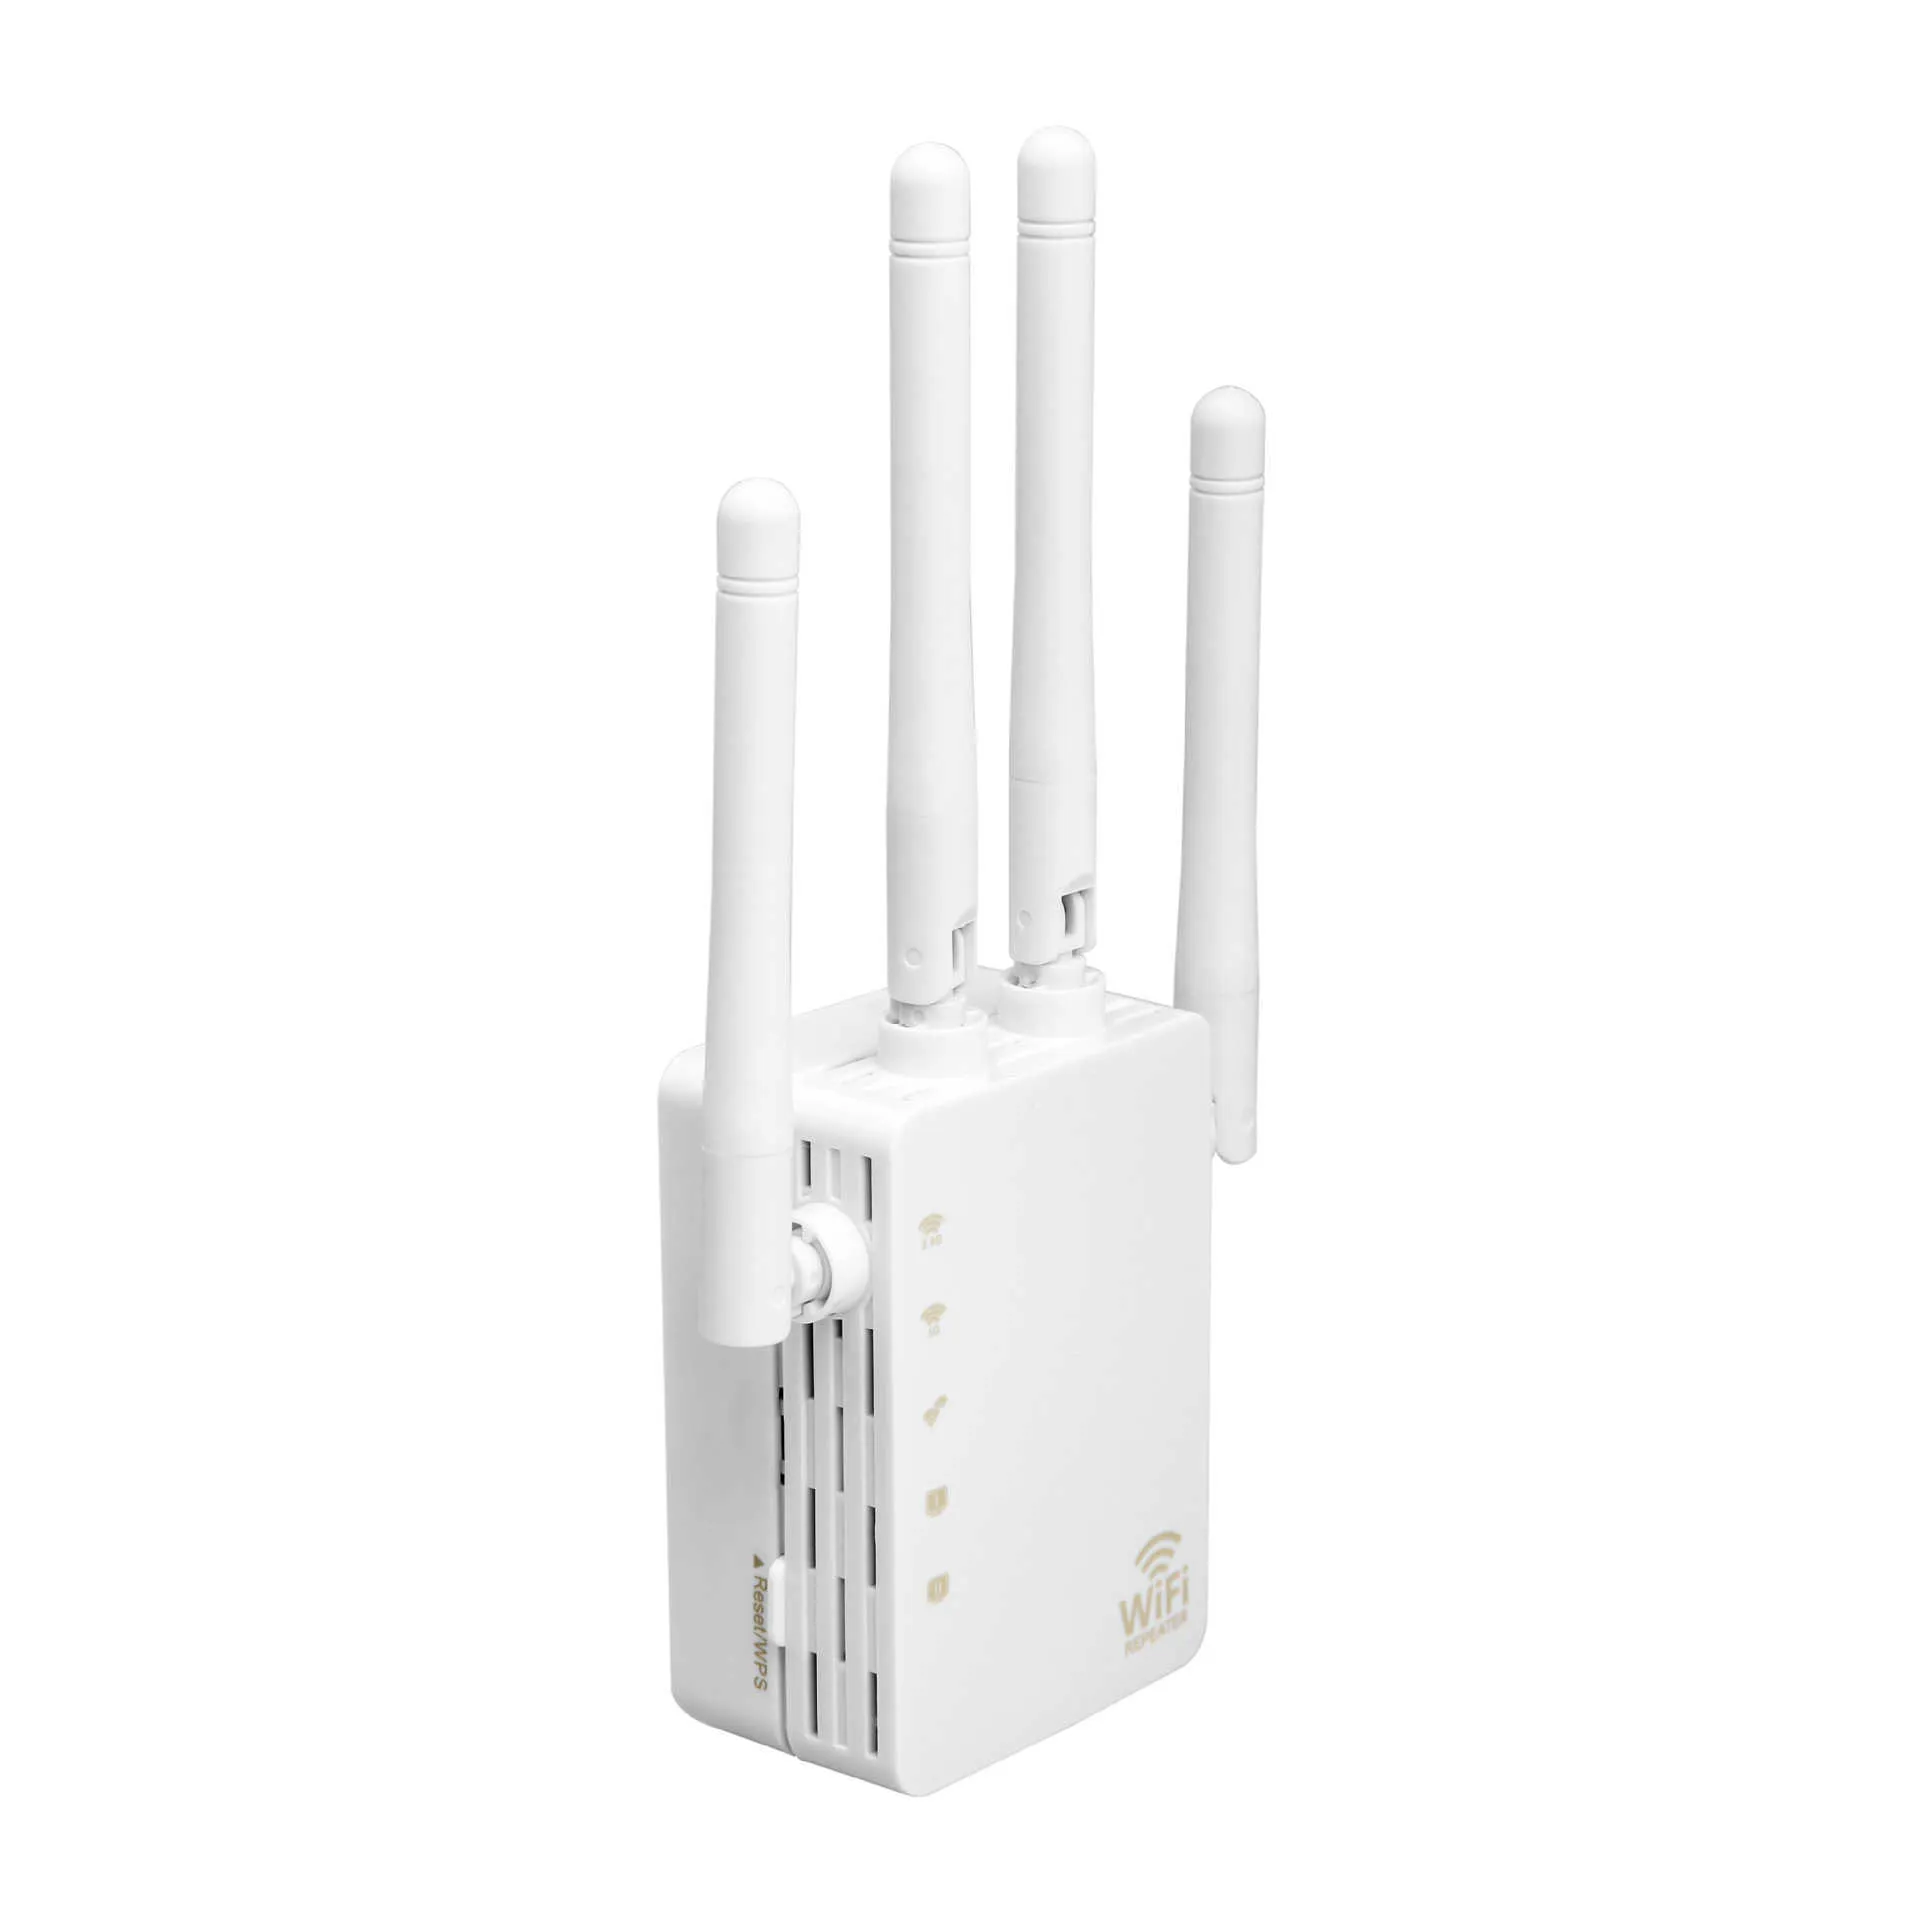 AC 1200Mbps Repeater 2,4 GHz 5,8 GHz draadloze router signaalversterker draadloos AP